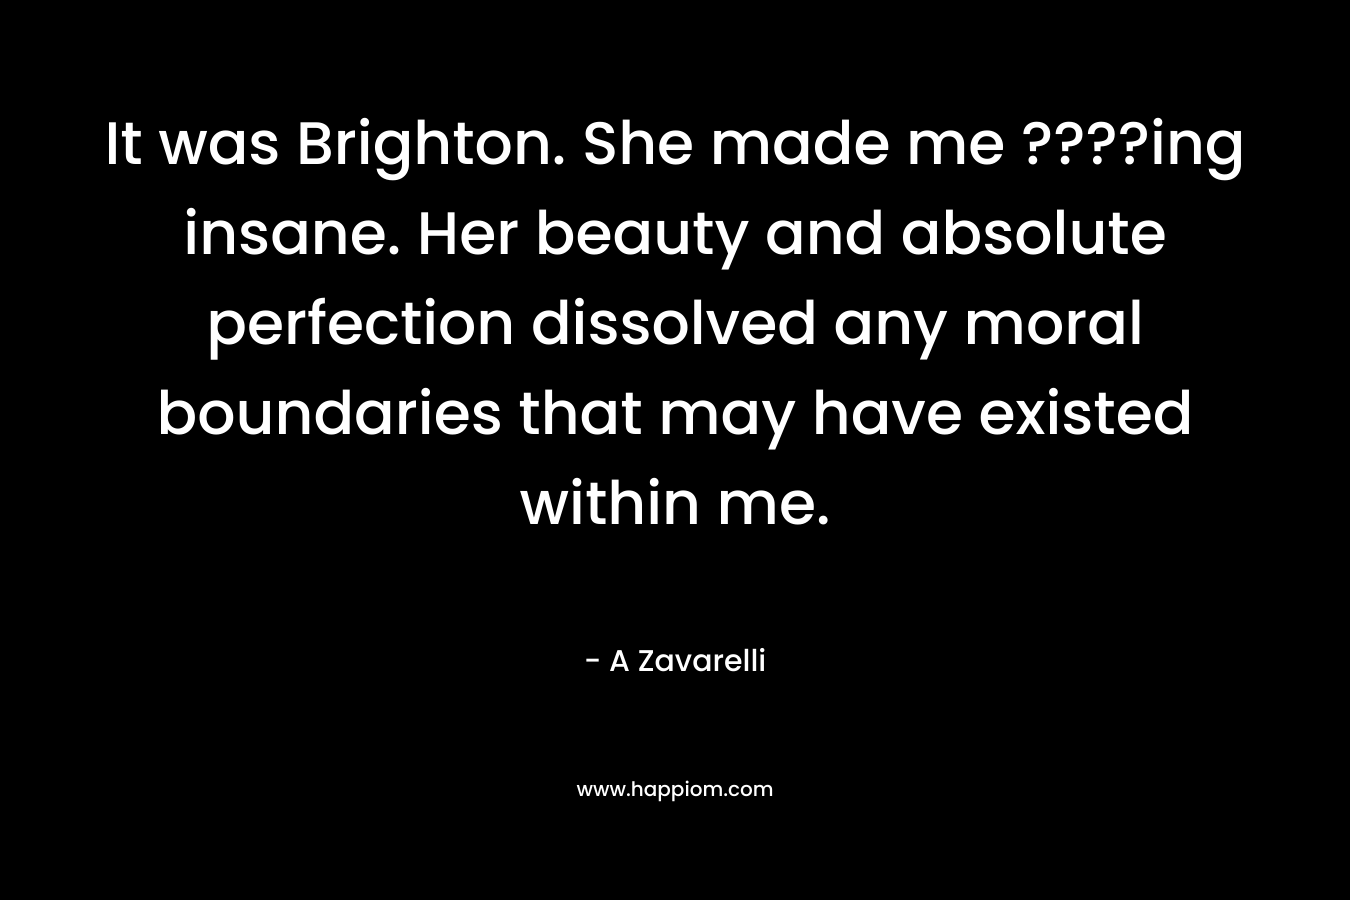 It was Brighton. She made me ????ing insane. Her beauty and absolute perfection dissolved any moral boundaries that may have existed within me. – A Zavarelli